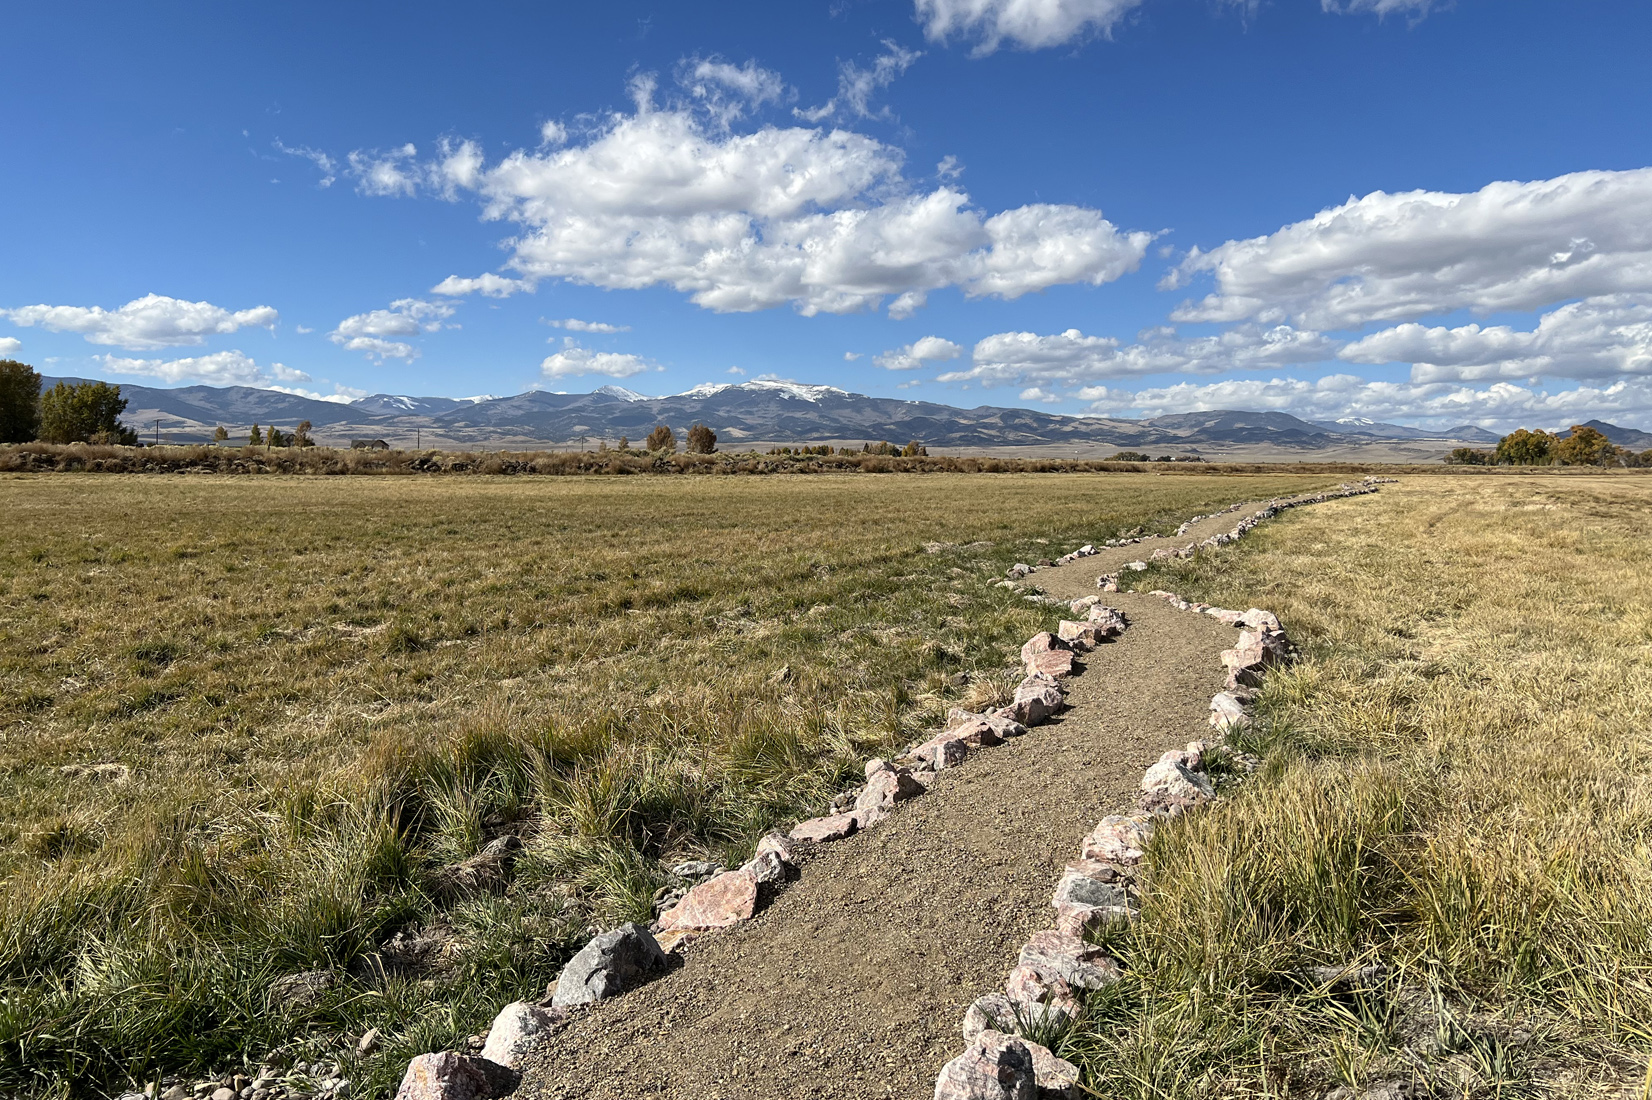 well-maintained trail, lined with sines, leads across flat land toward mountains